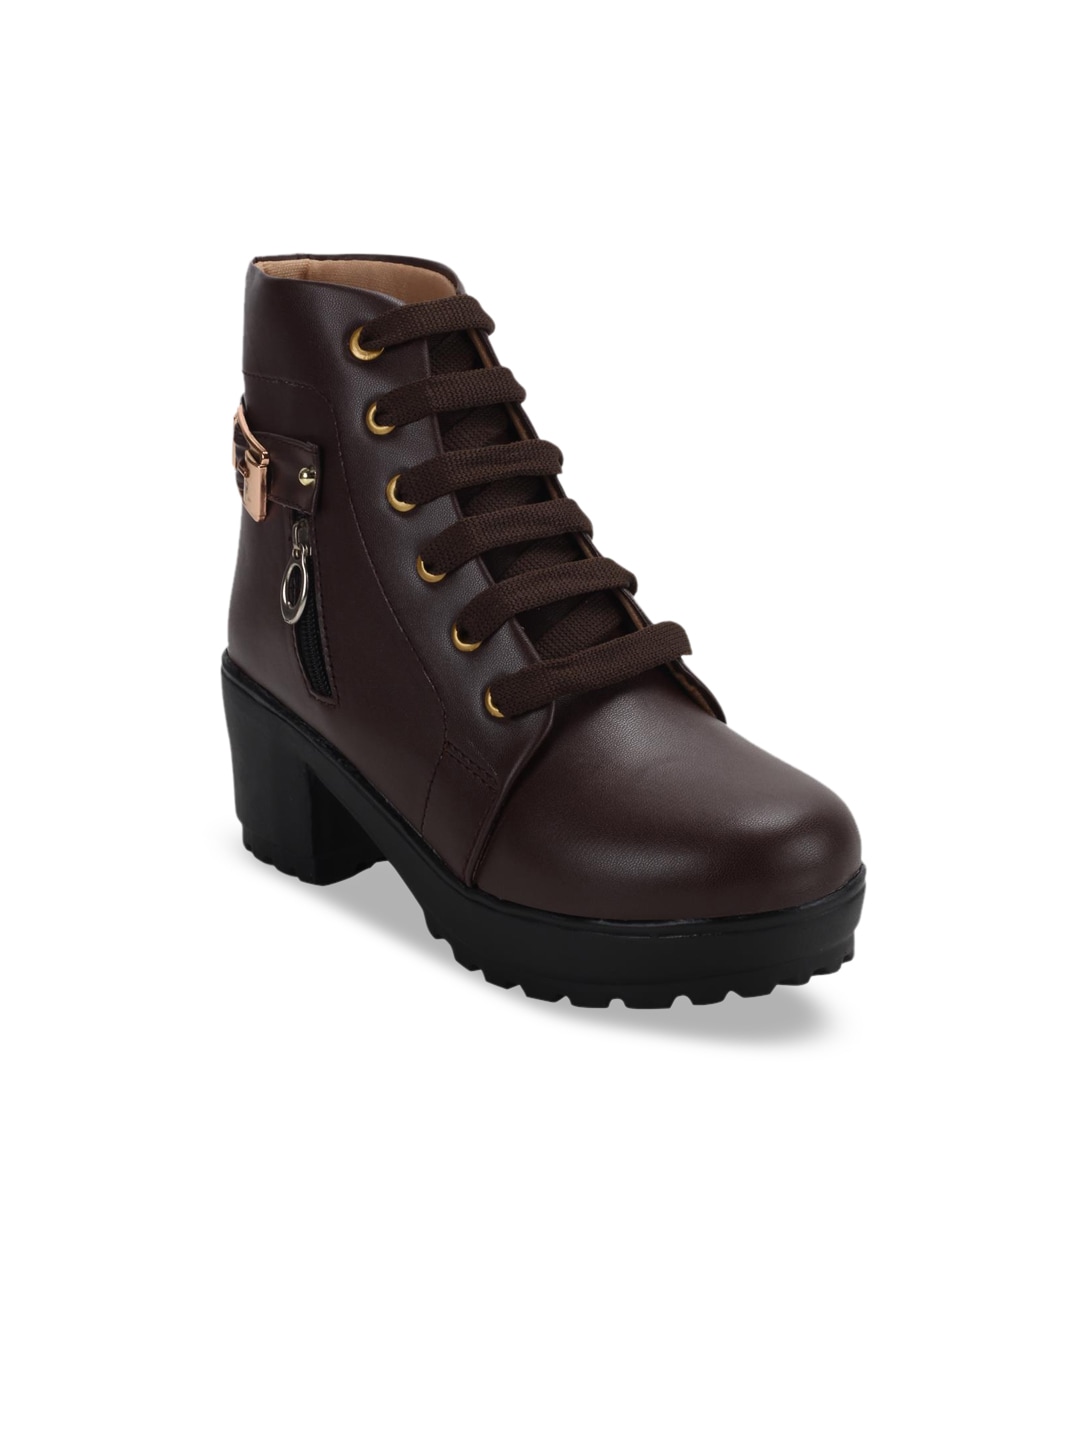 ZAPATOZ Women Brown Solid Heeled Boots Price in India